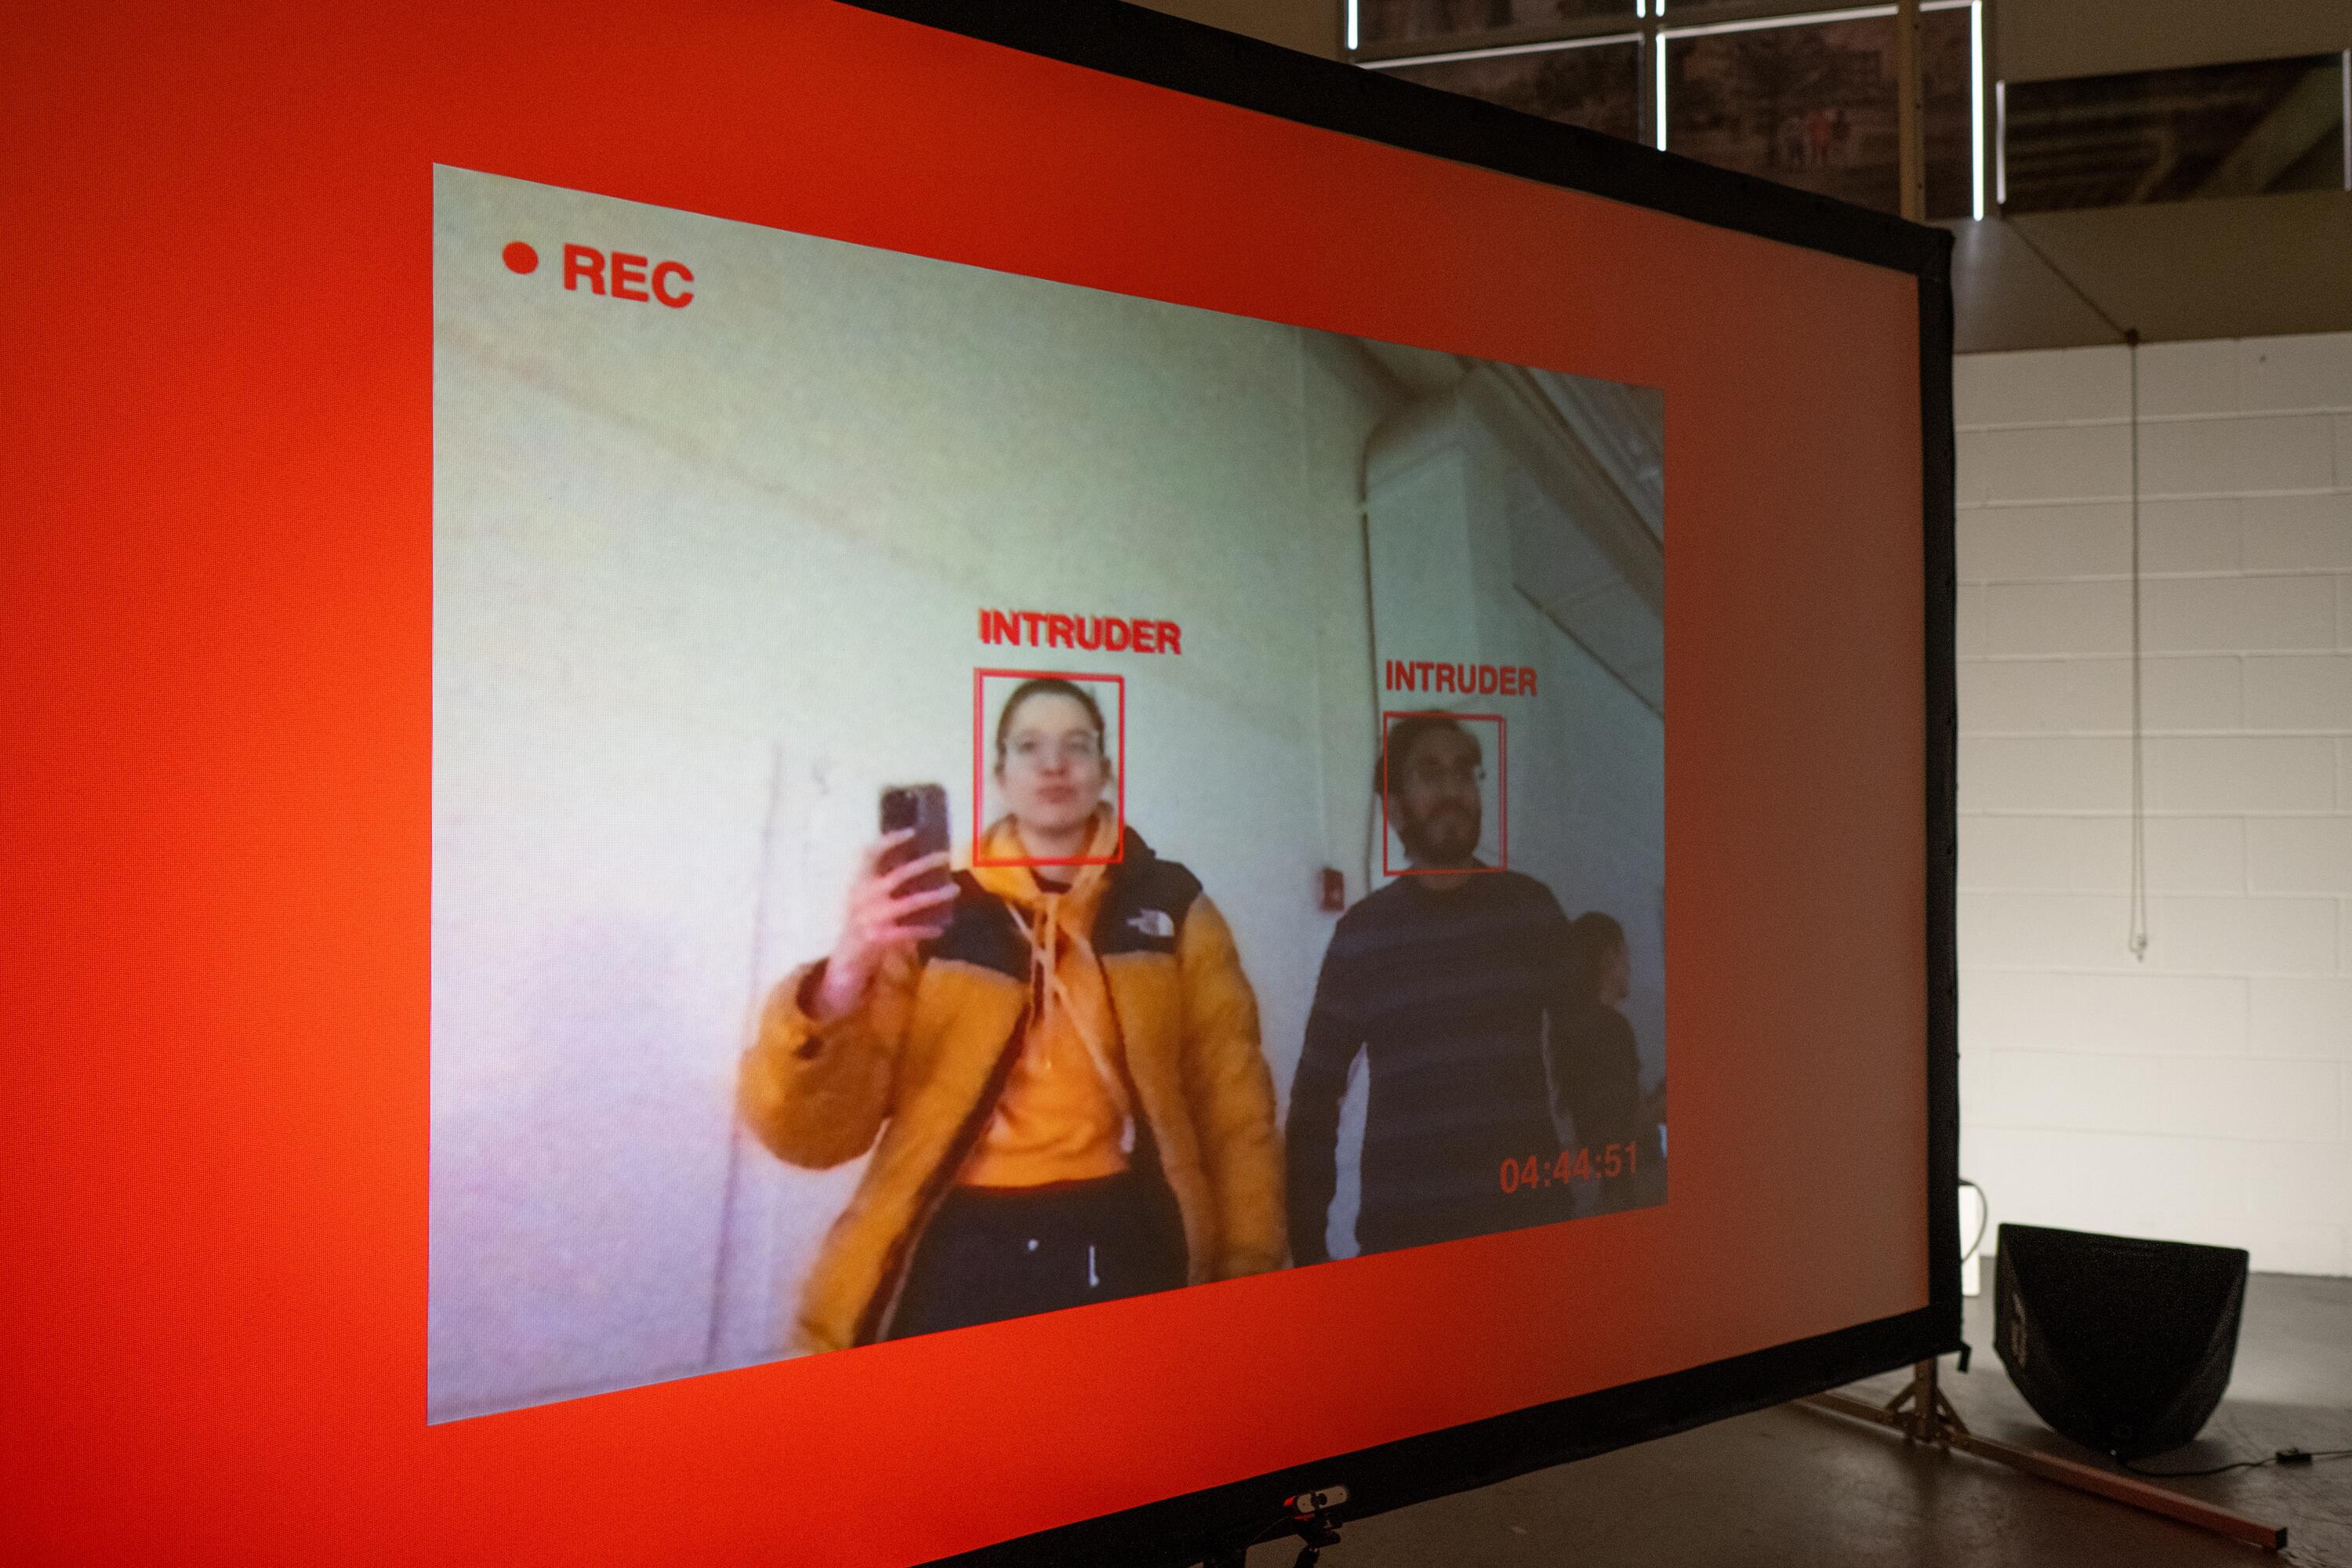  background is red. inside if a smaller recentage mimicing a video feed (you can see 2 people). Their faces are marked with a red rectange, with the word "intruder" and the left top corneer is a REC sign, bottom right corner is a timestamp